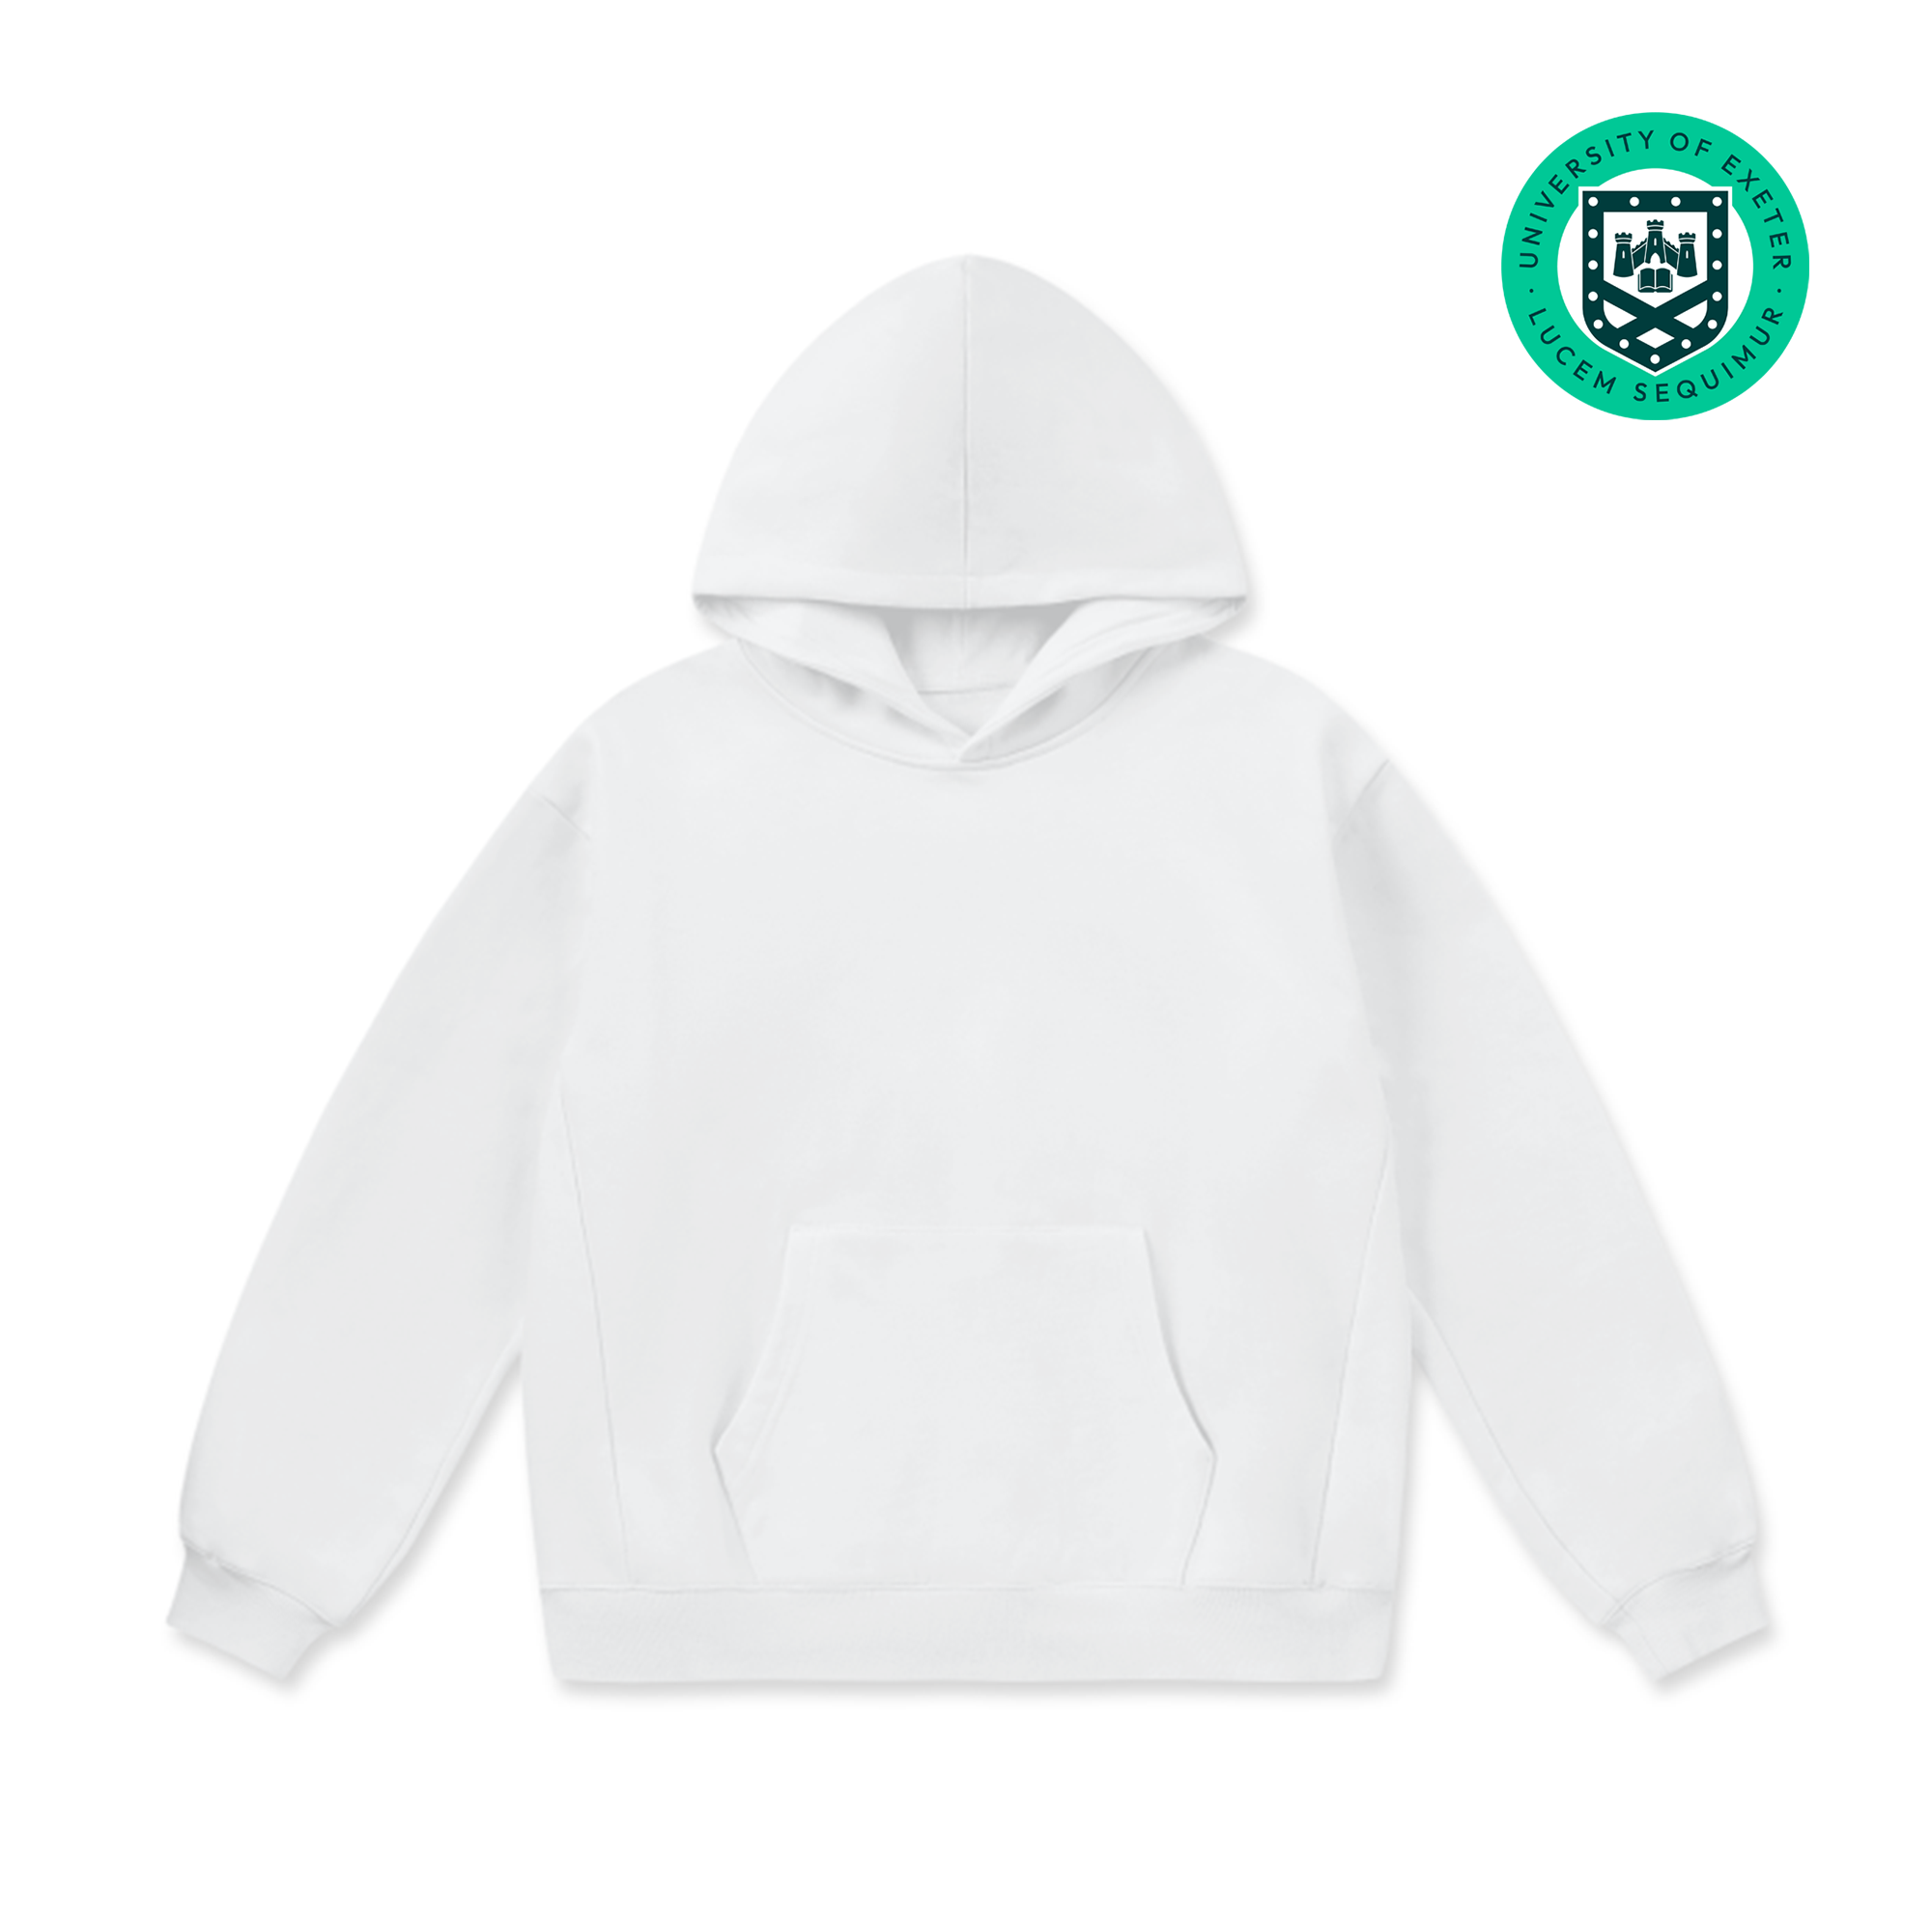 LCC Super Weighted Hoodie - University of Exeter (Classic)